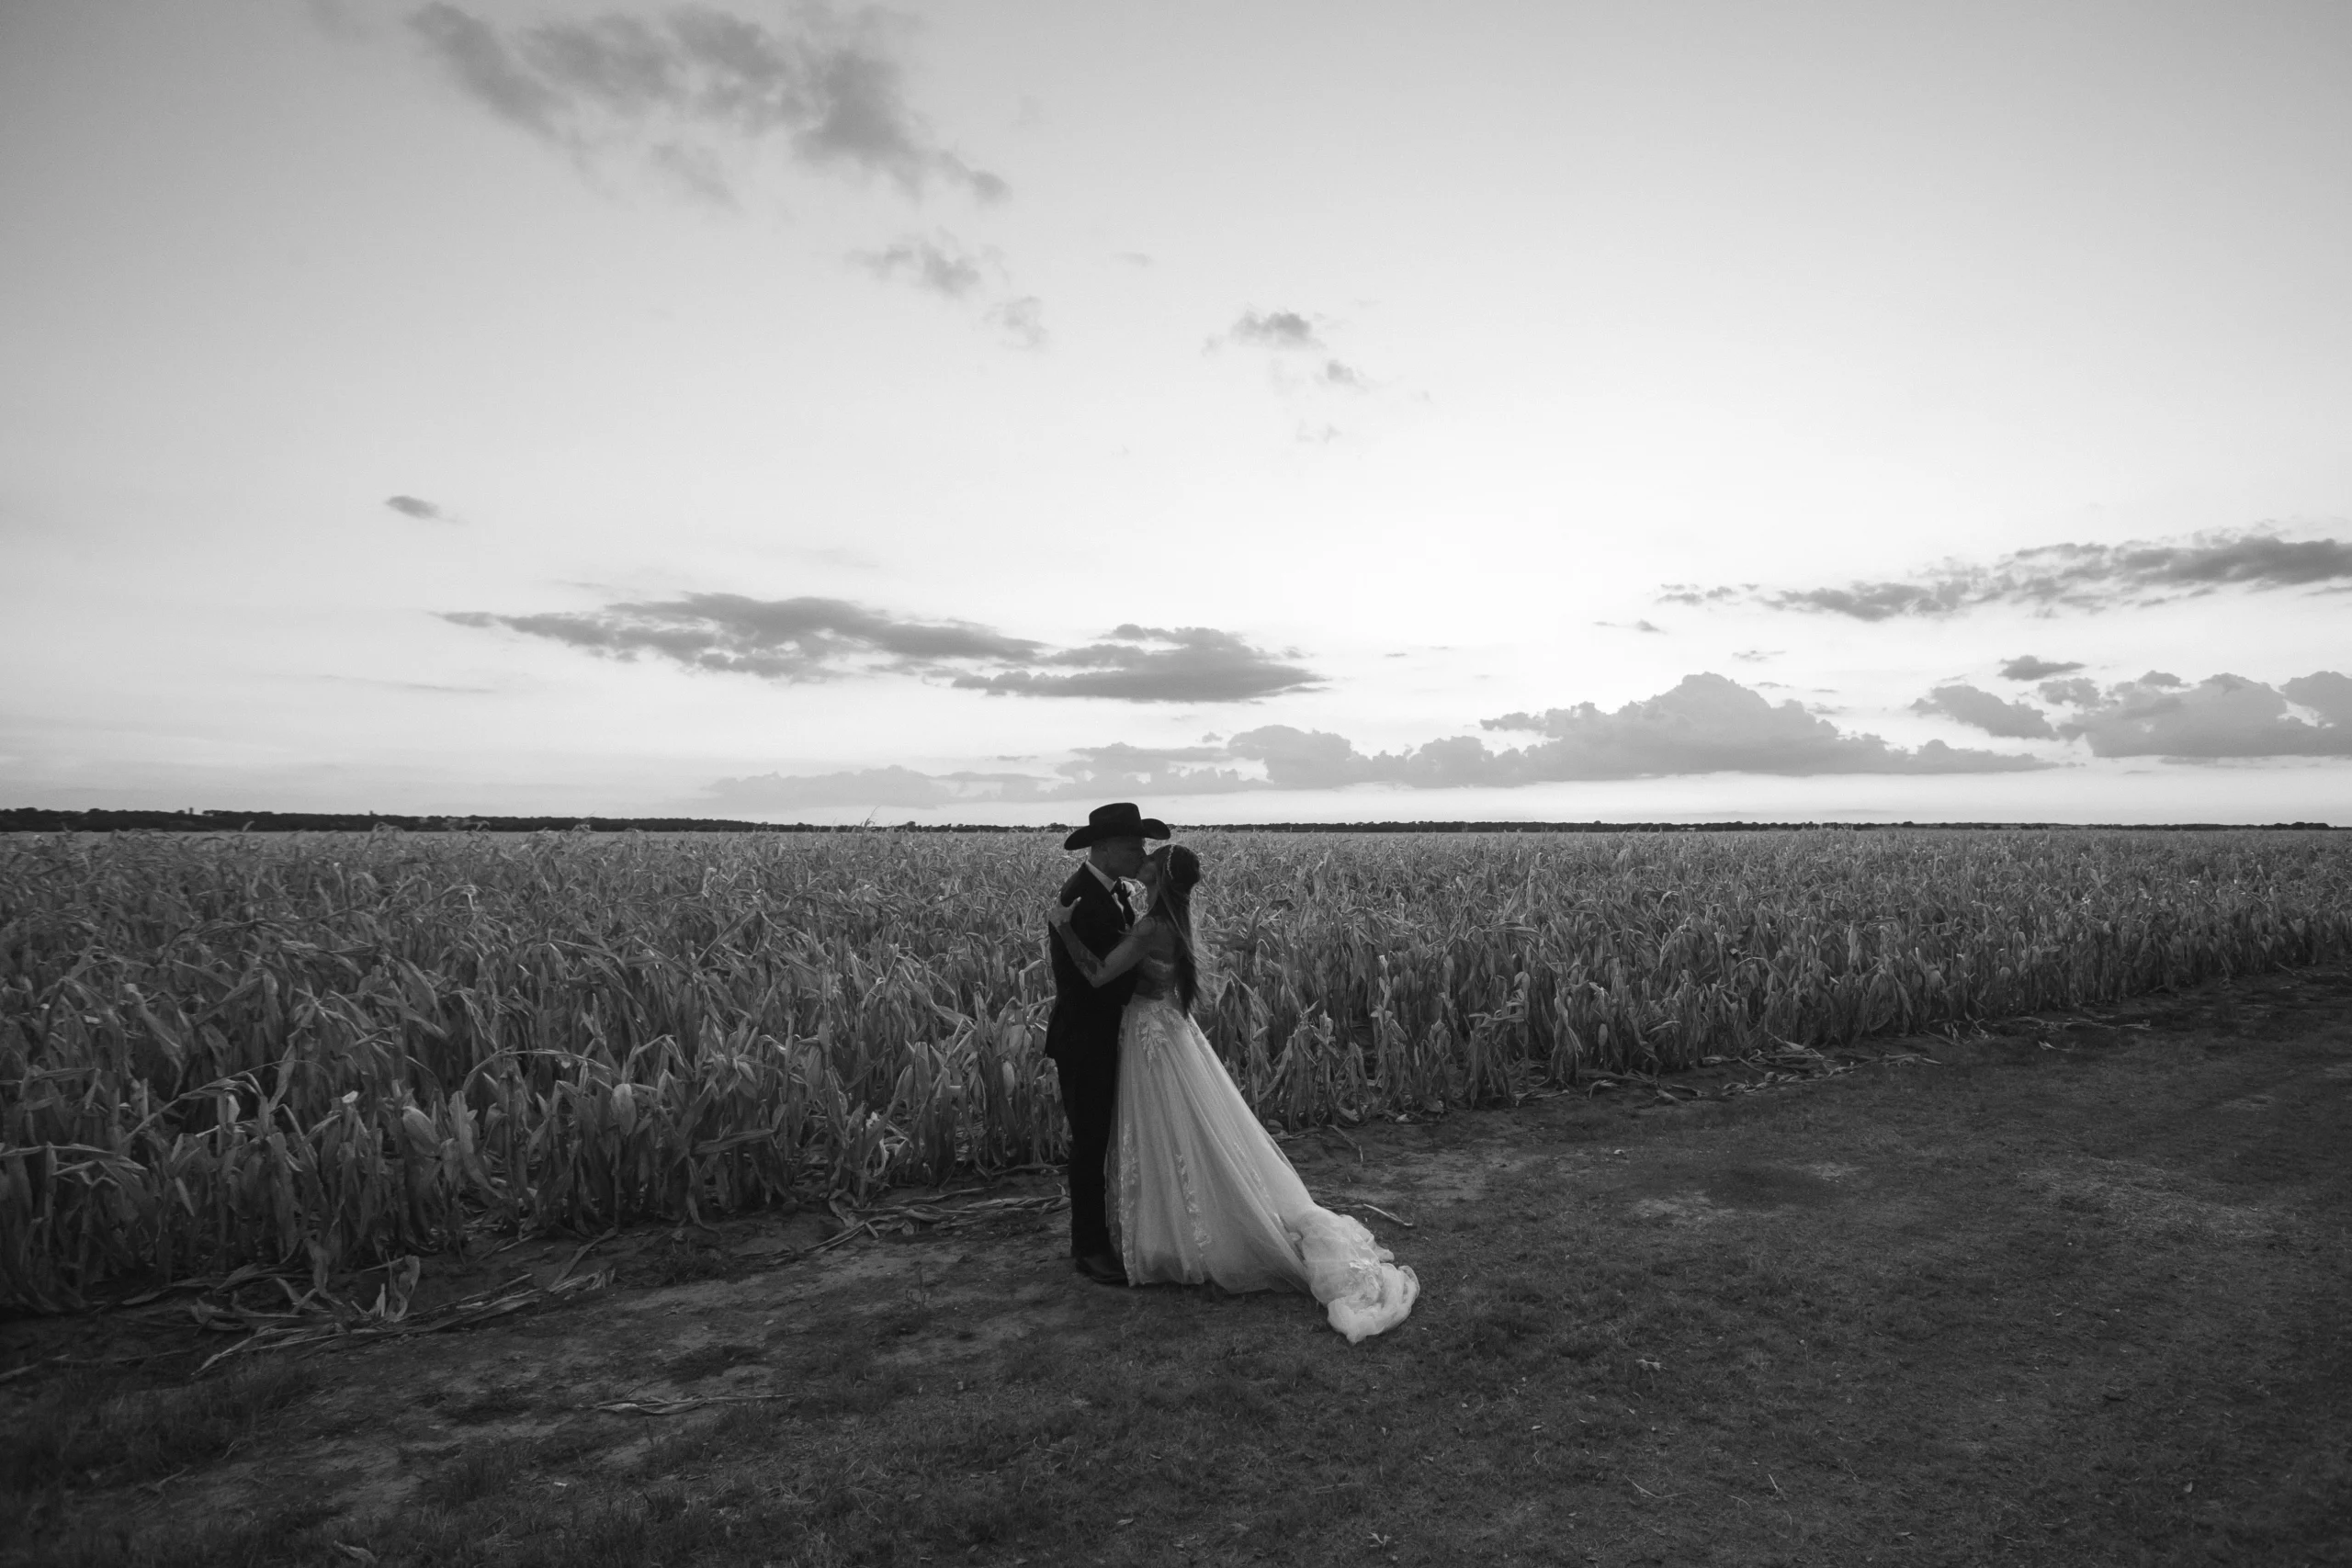 A bride and groom share a kiss in front of an open corn field | Rae Allen Photography front page image